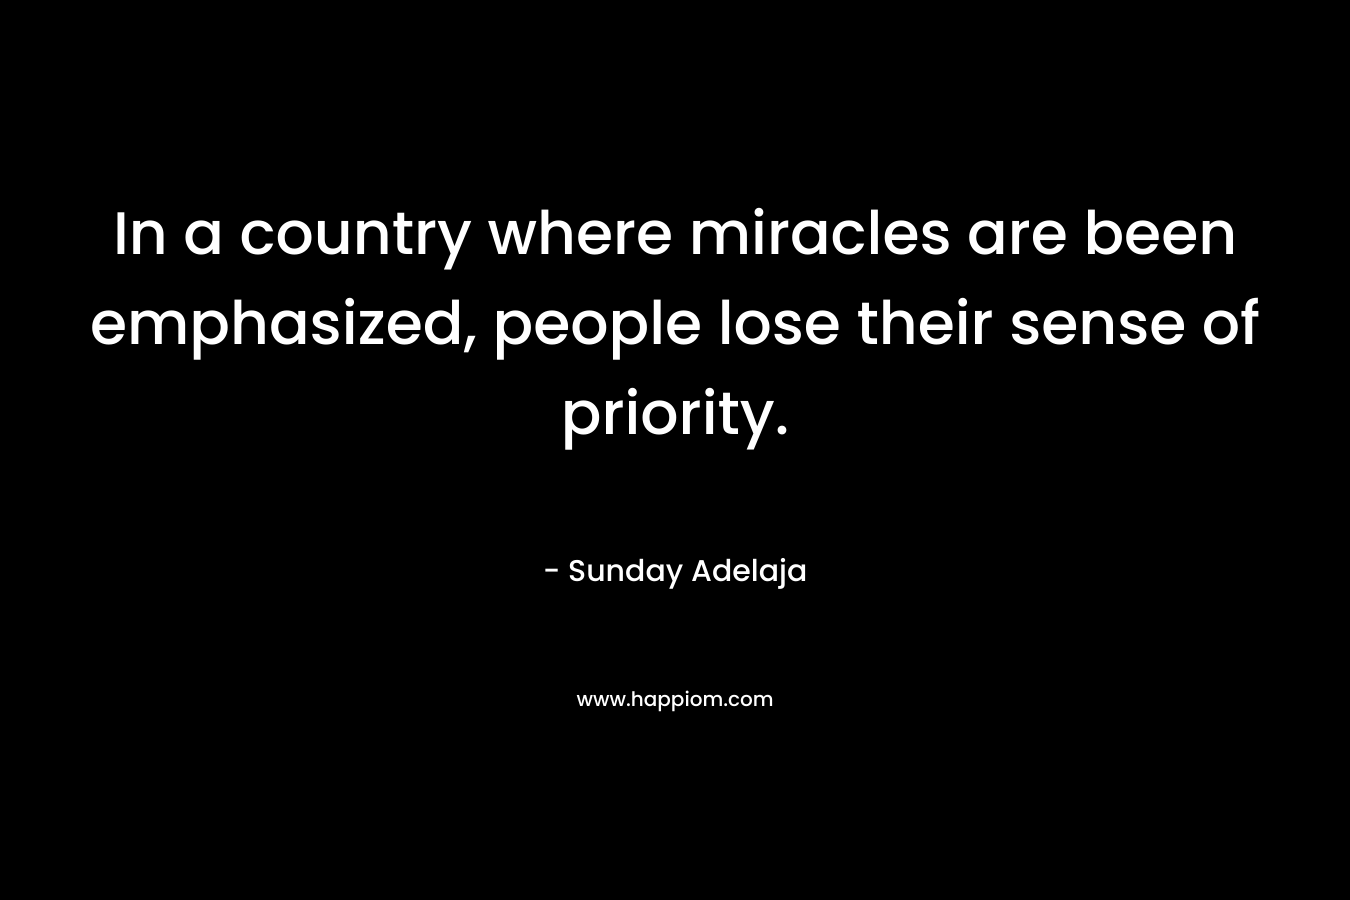 In a country where miracles are been emphasized, people lose their sense of priority. – Sunday Adelaja